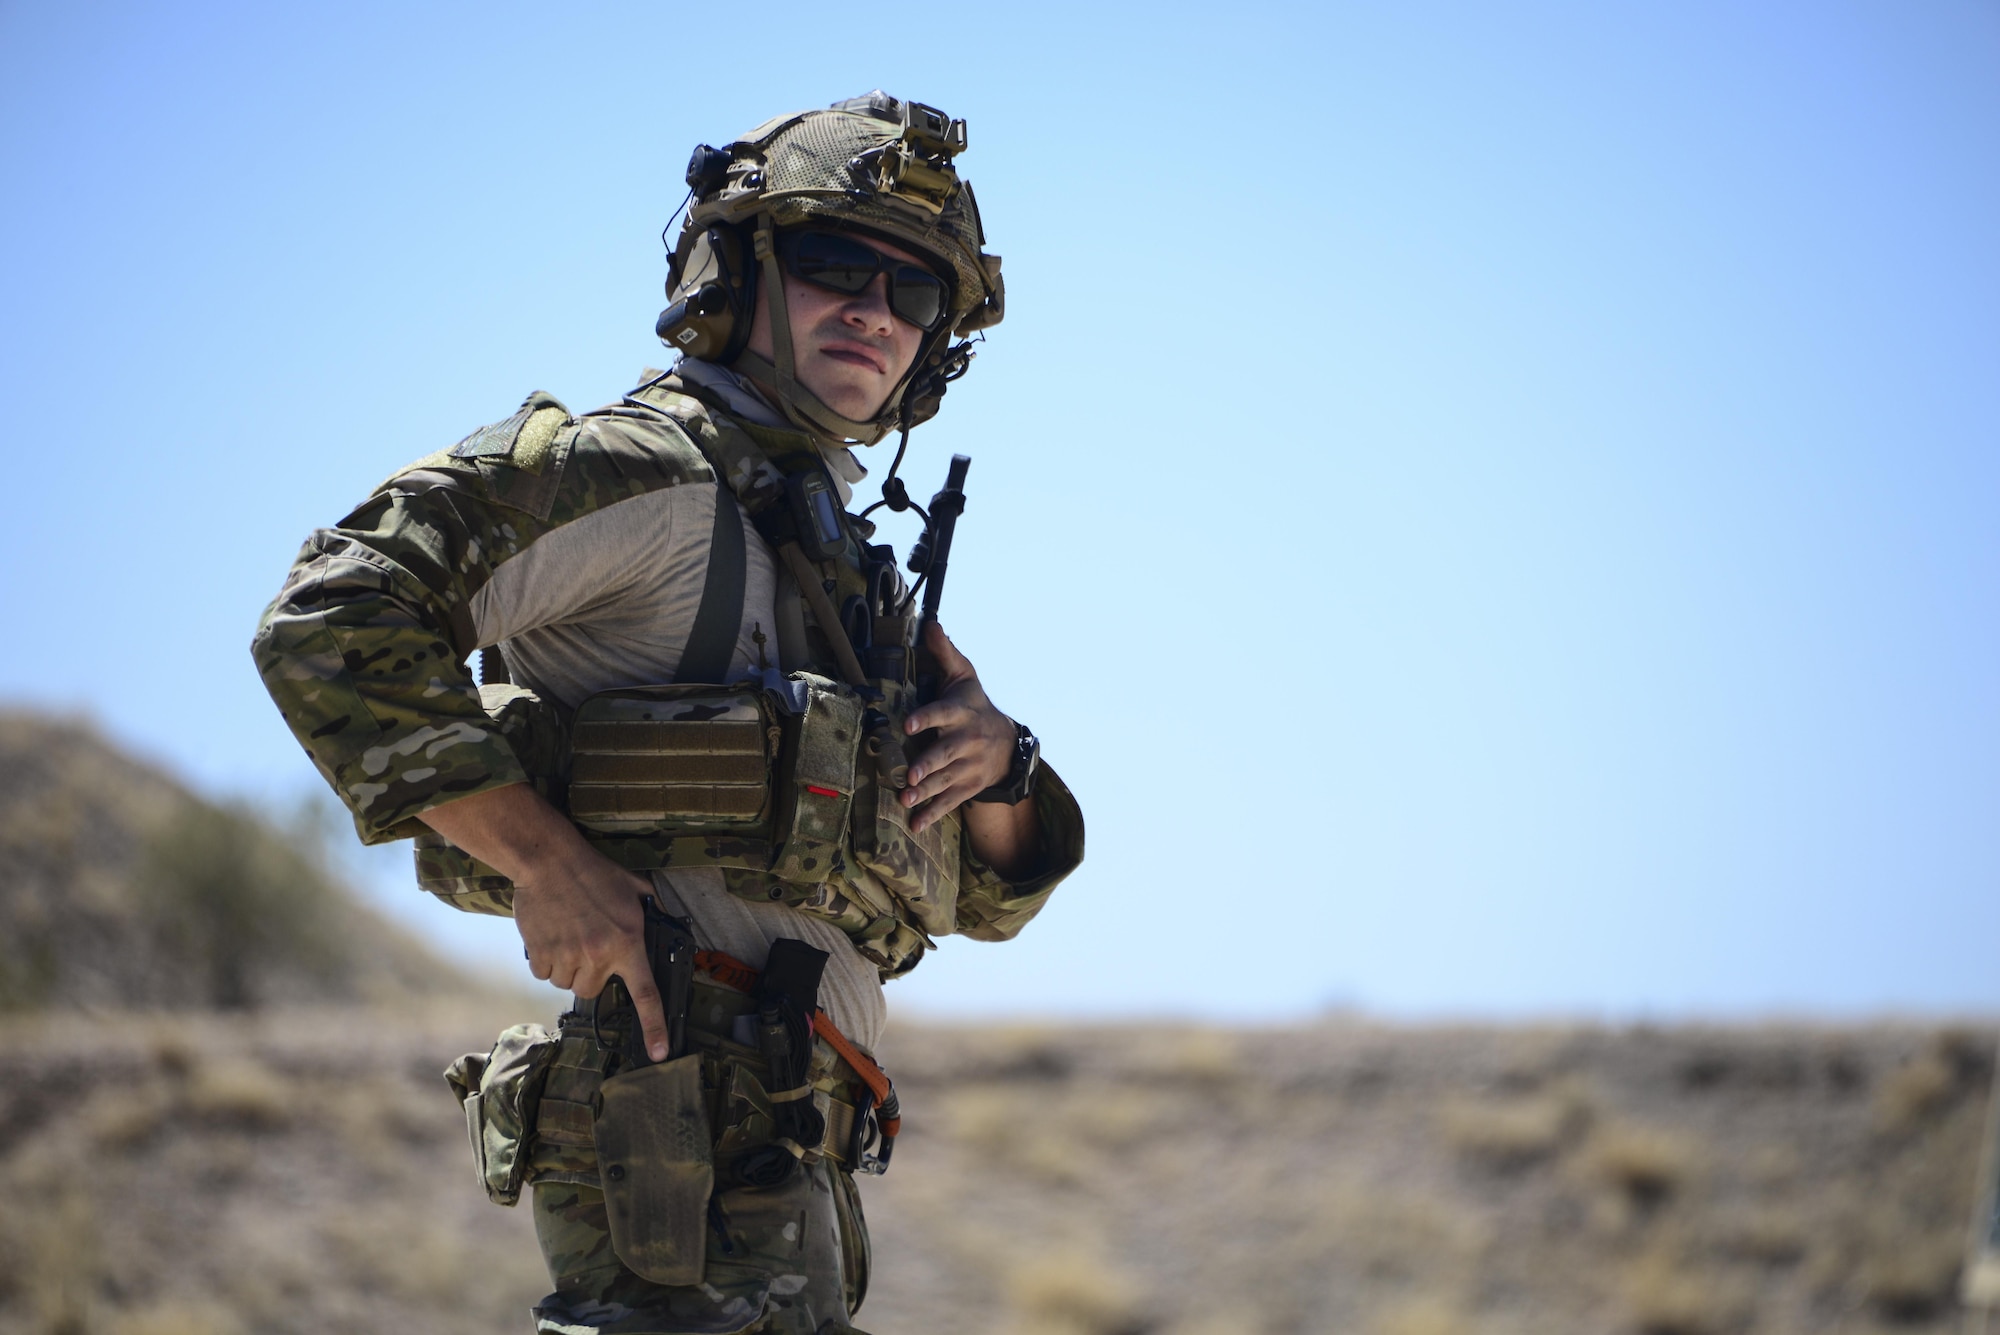 A U.S. Air Force pararescueman holsters his weapon during the Guardian Angel Mission Qualification Training course at Davis-Monthan Air Force Base, Ariz., May 17, 2017. The MQT is a 90 day GA Formal traning course that takes pararescuemen who have completed Air Education and Training Command schooling and helps them achieve their 5-level qualification. (U.S. Air Force photo by Airman 1st Class Nathan H. Barbour)